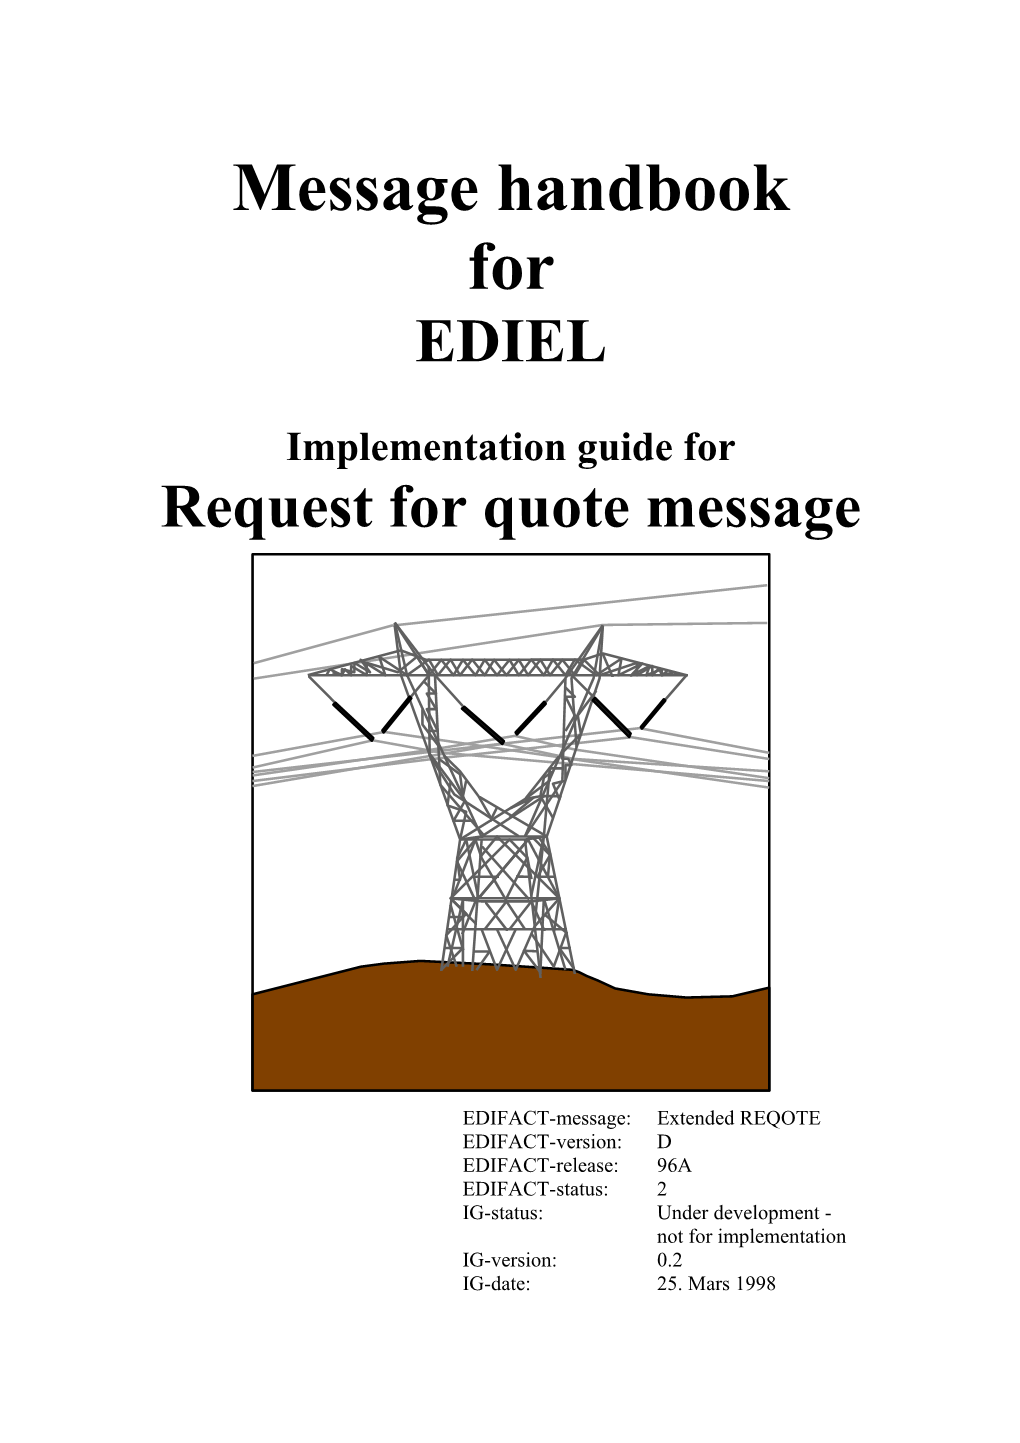 Implementation Guide for the Request for Quote Message 14